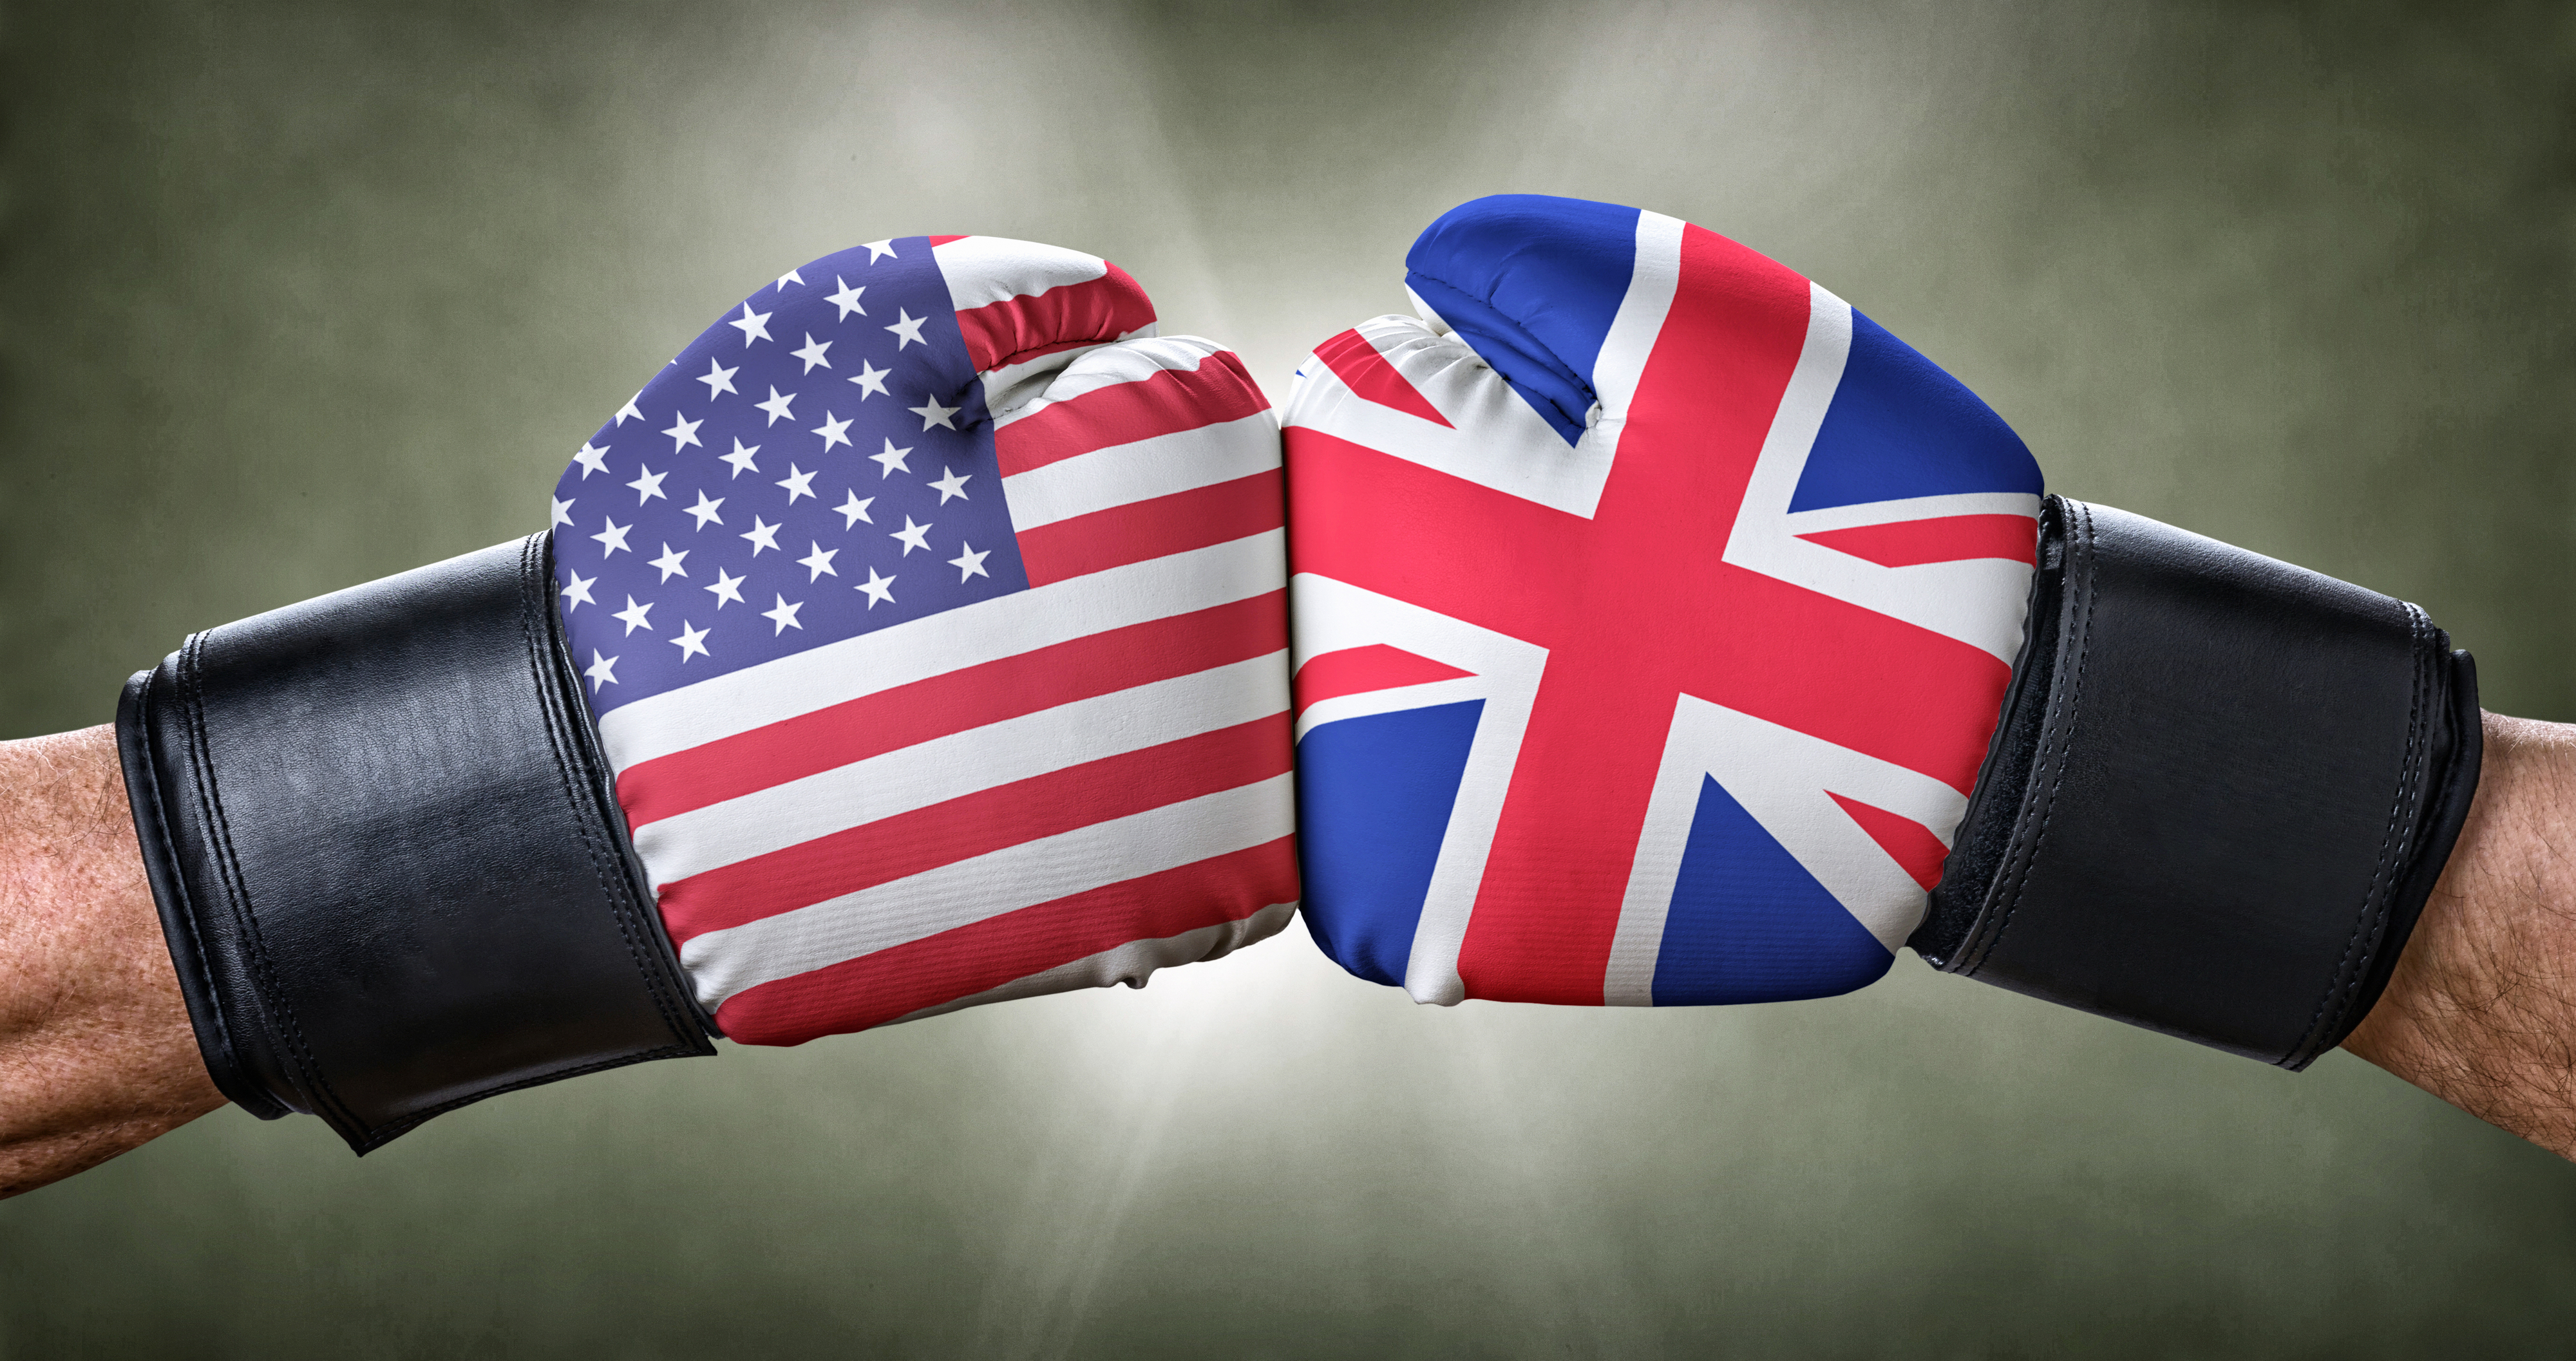 Two hands, one wearing a US flag and one a UK flag boxing glove